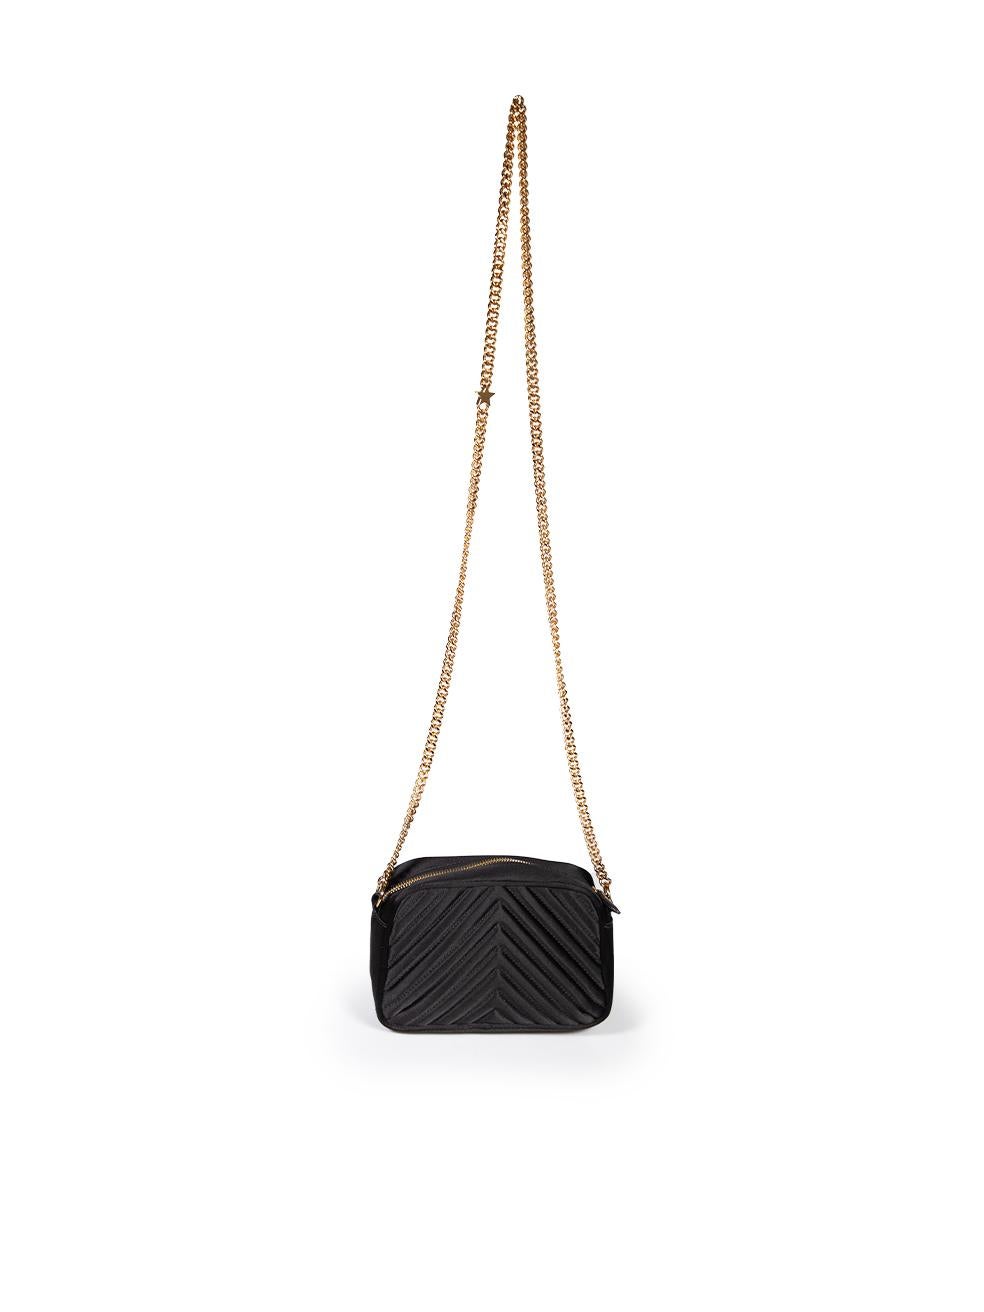 Stella McCartney Black Star Quilted Camera Bag In Good Condition For Sale In London, GB